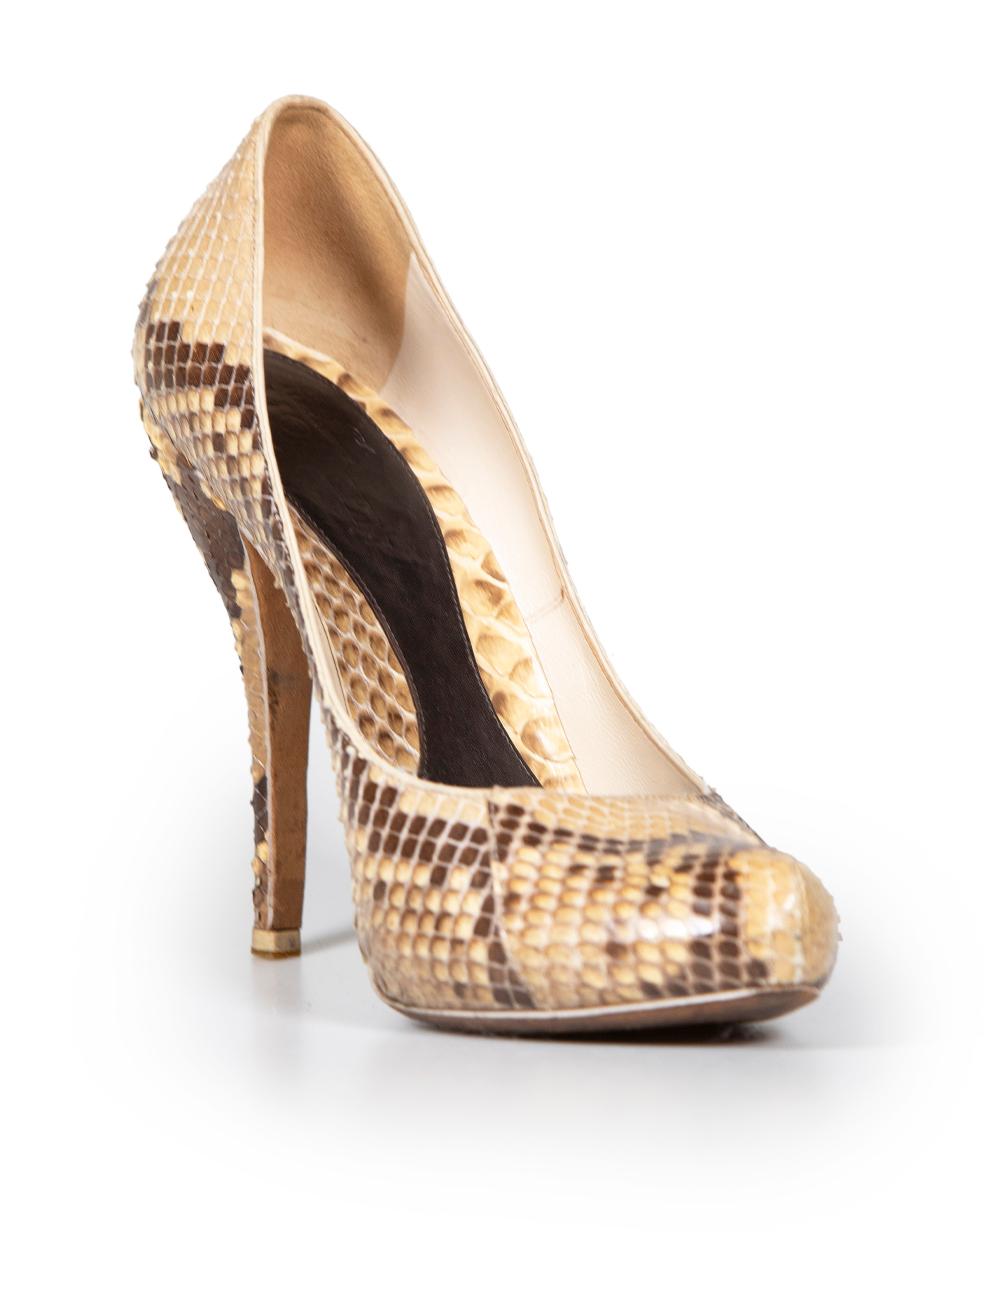 CONDITION is Good. General wear to heels is evident. Moderate signs of wear to soles and python skin has some peeling at the back and sides of the heels on this used Alexander McQueen designer resale item.
 
 
 
 Details
 
 
 Beige
 
 Snakeskin
 
